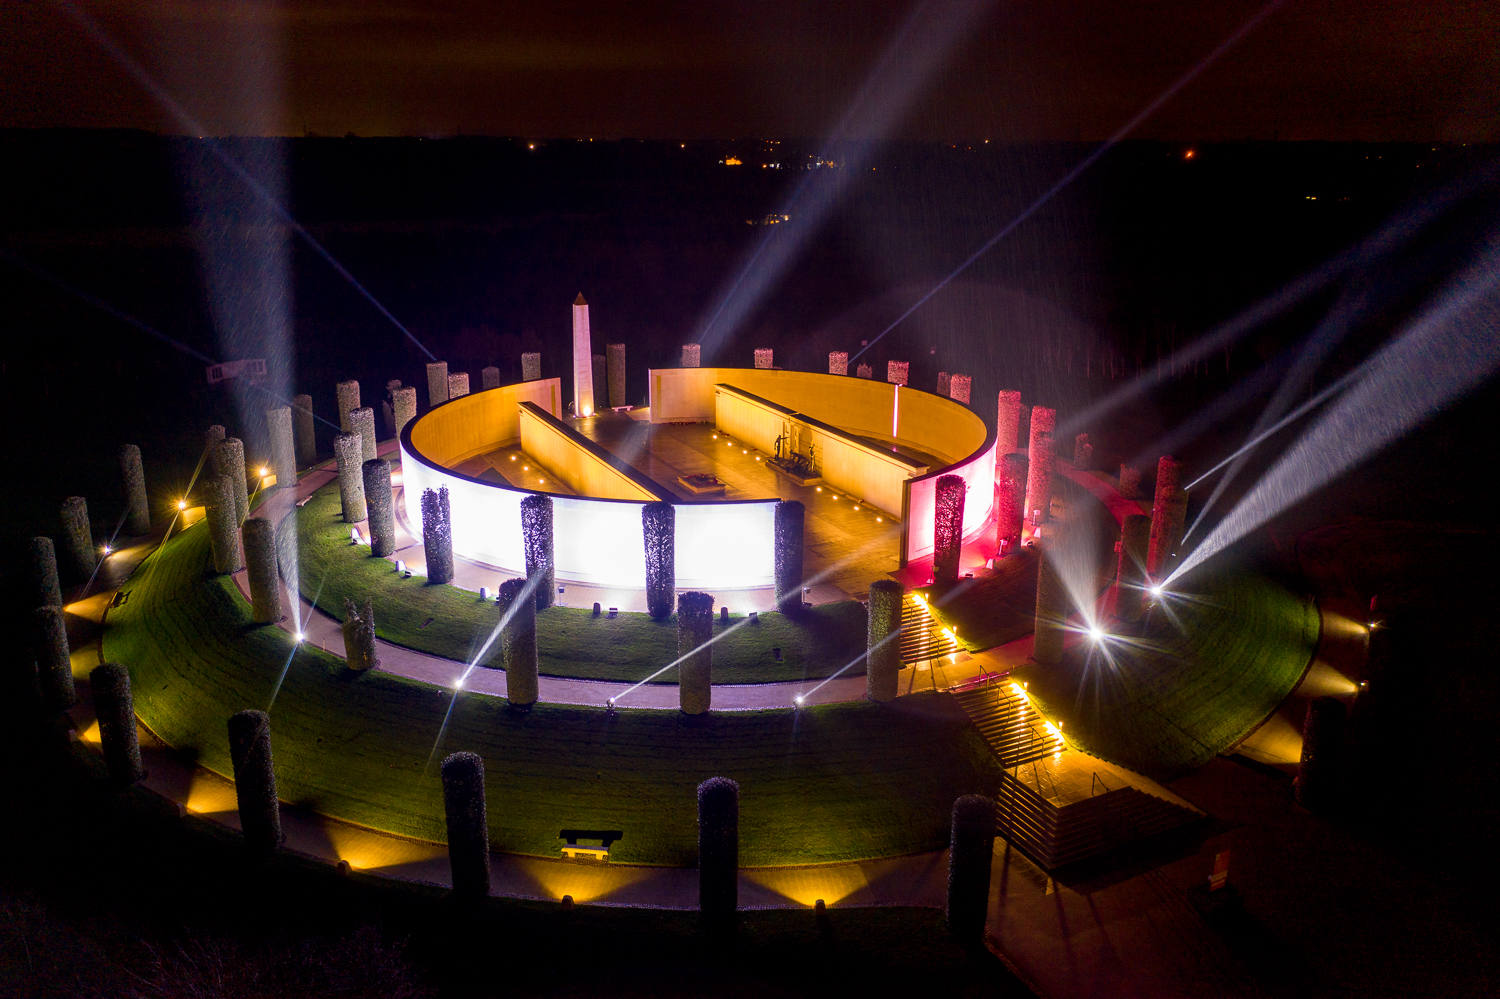 National Memorial arboretum Drone Photography at night by inspire drone media